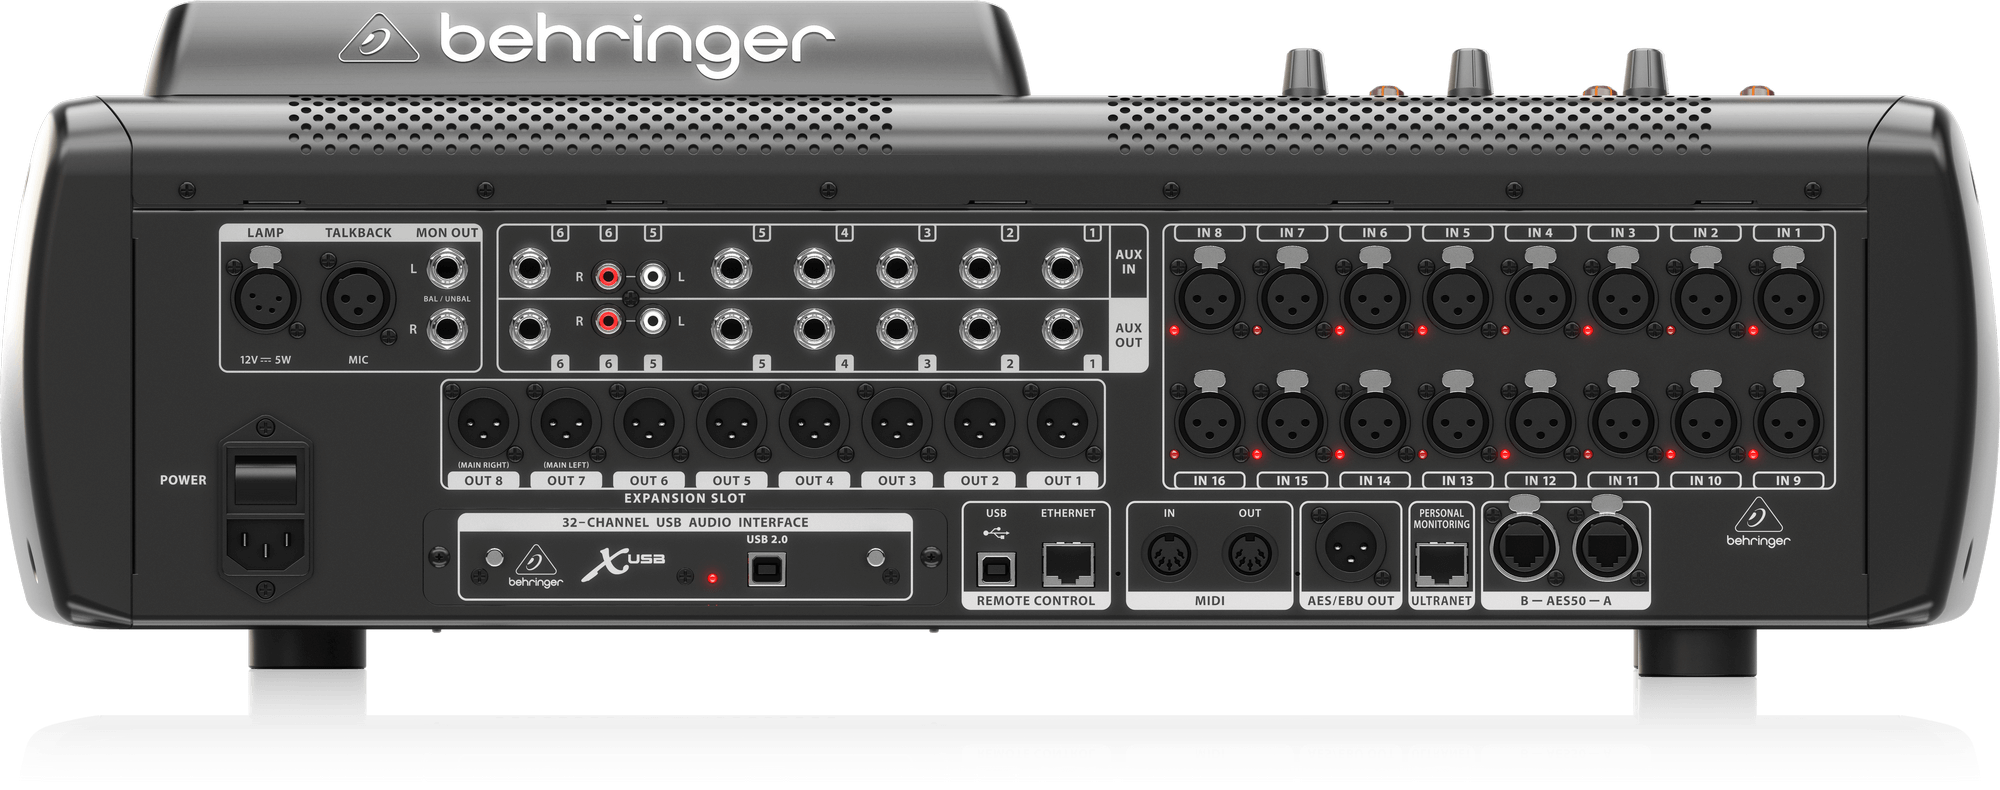 Behringer Product X32 Compact